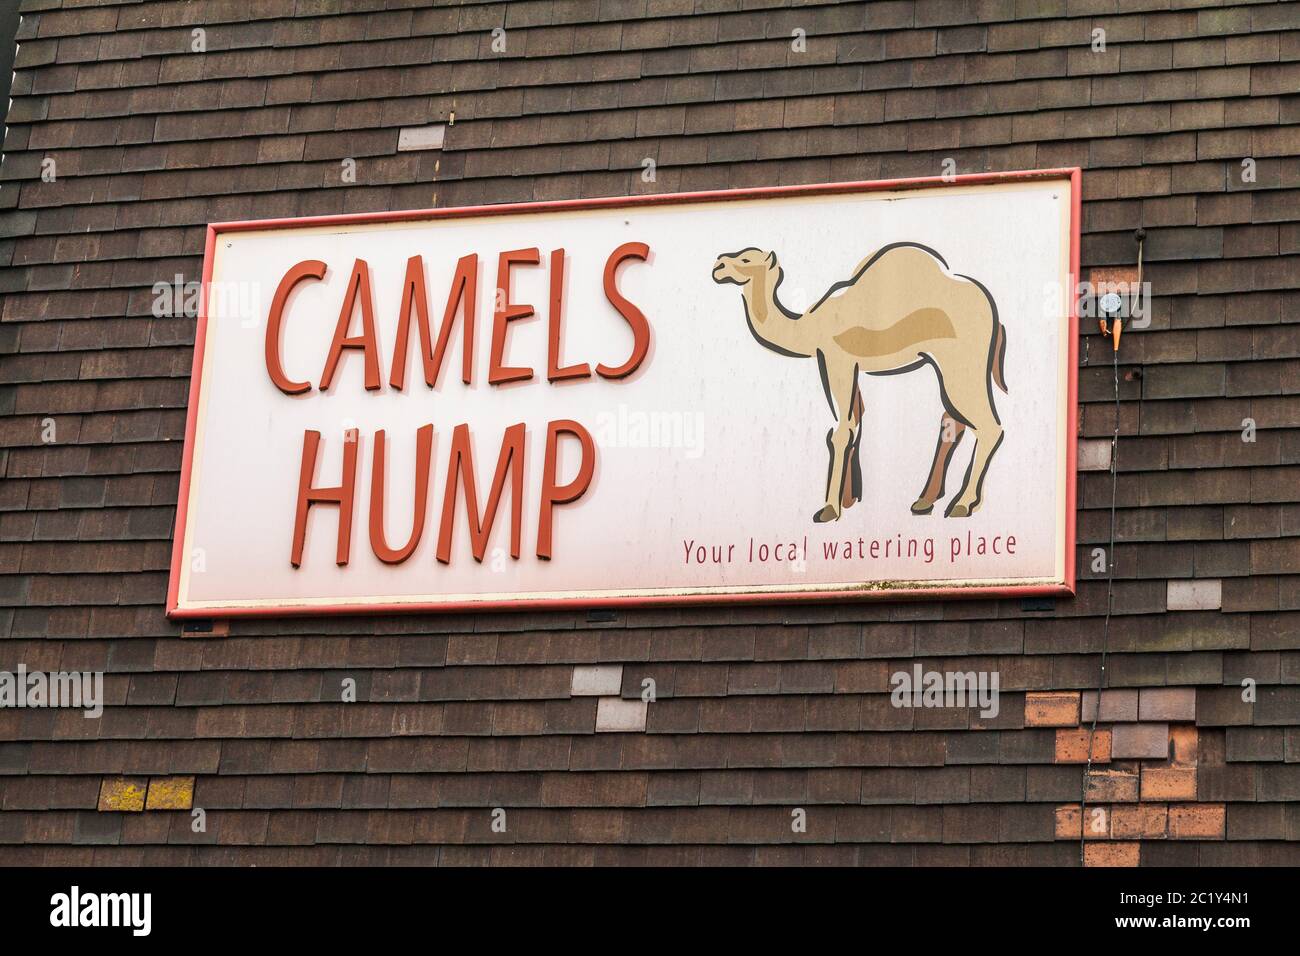 Camels Hump pub sign in Middlesbrough,England,UK. Stock Photo